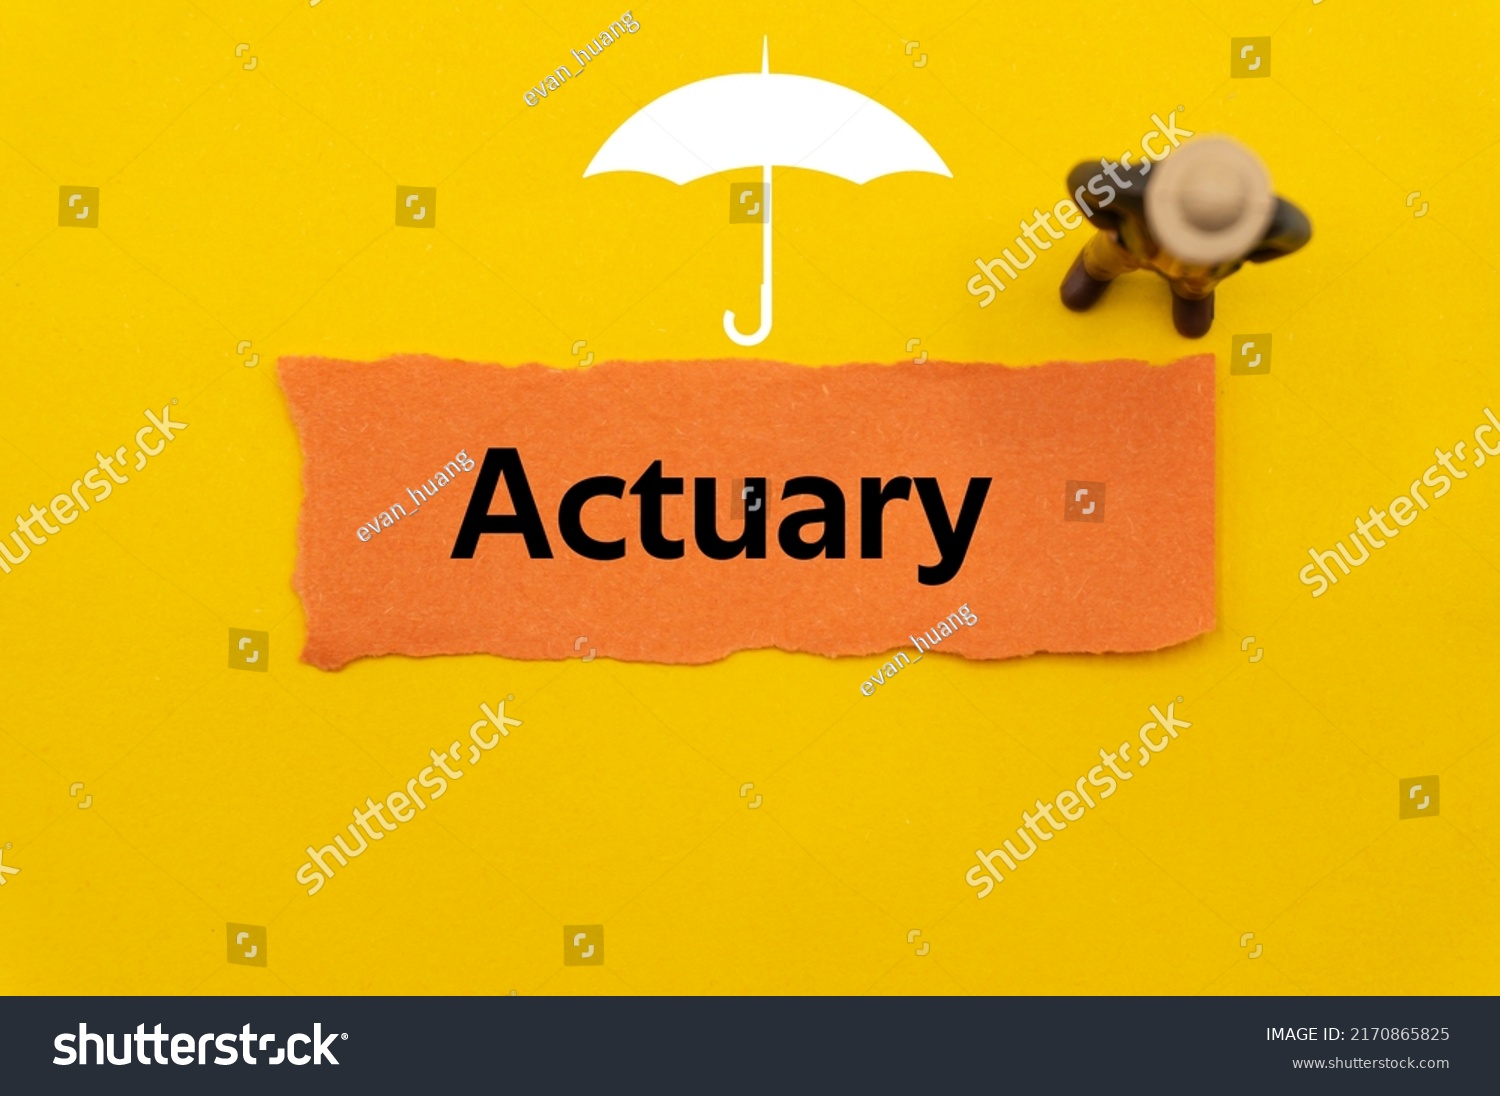 Actuary.The word is written on a slip of colored paper. Insurance terms, health care words, Life insurance terminology. business Buzzwords. #2170865825